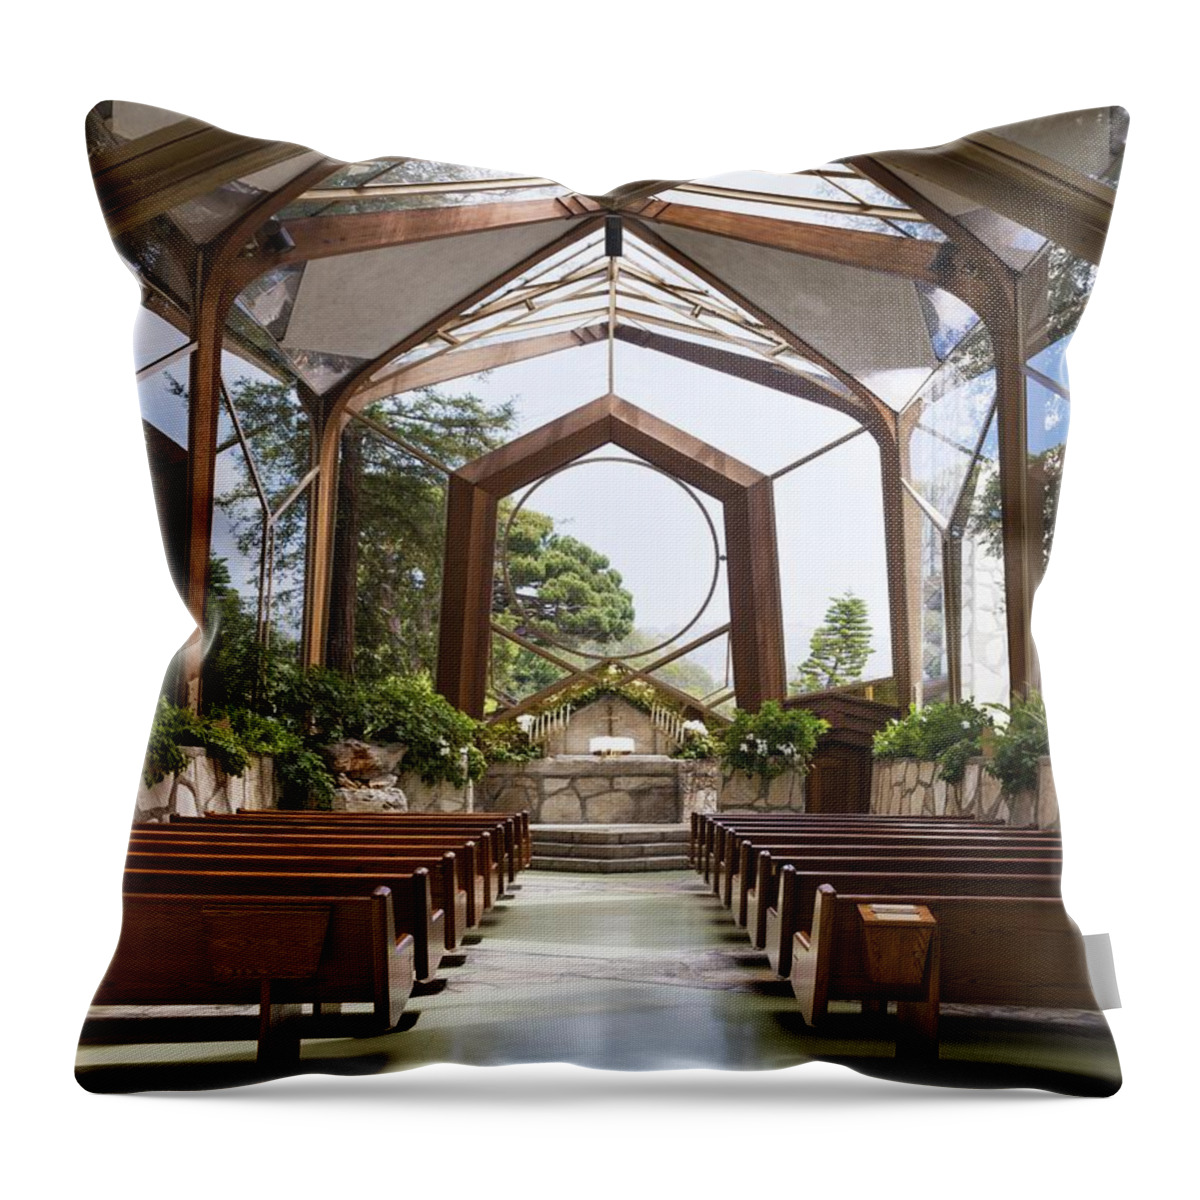  Throw Pillow featuring the painting Wayfarers Chapel also known as The Glass Church is located in Rancho Palos Verdes California It is n by Les Classics